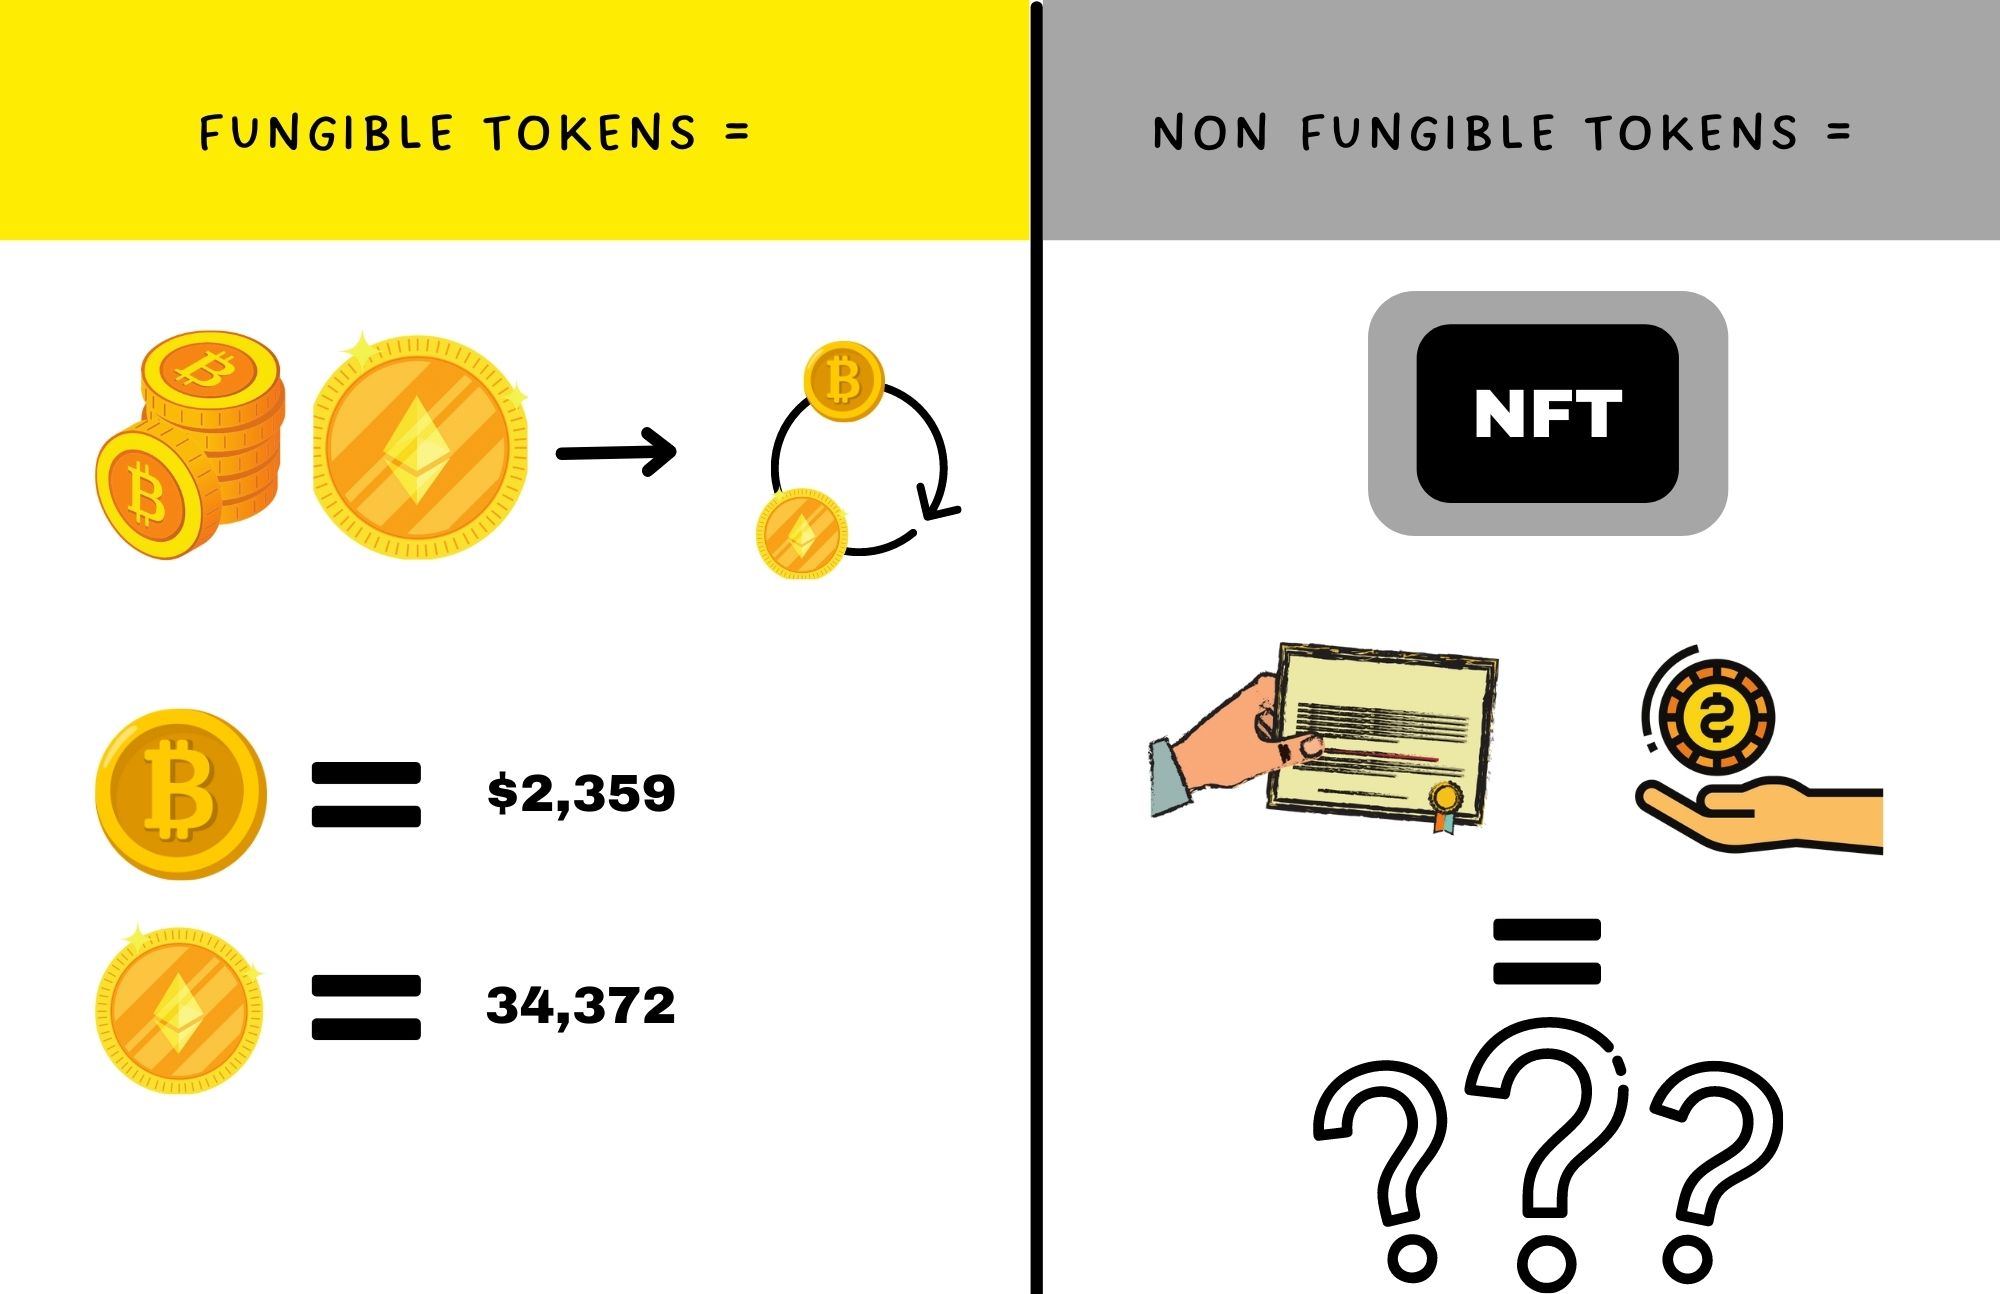 The example of fungible token is shown on the left, and the non-fungible token is shown on the right